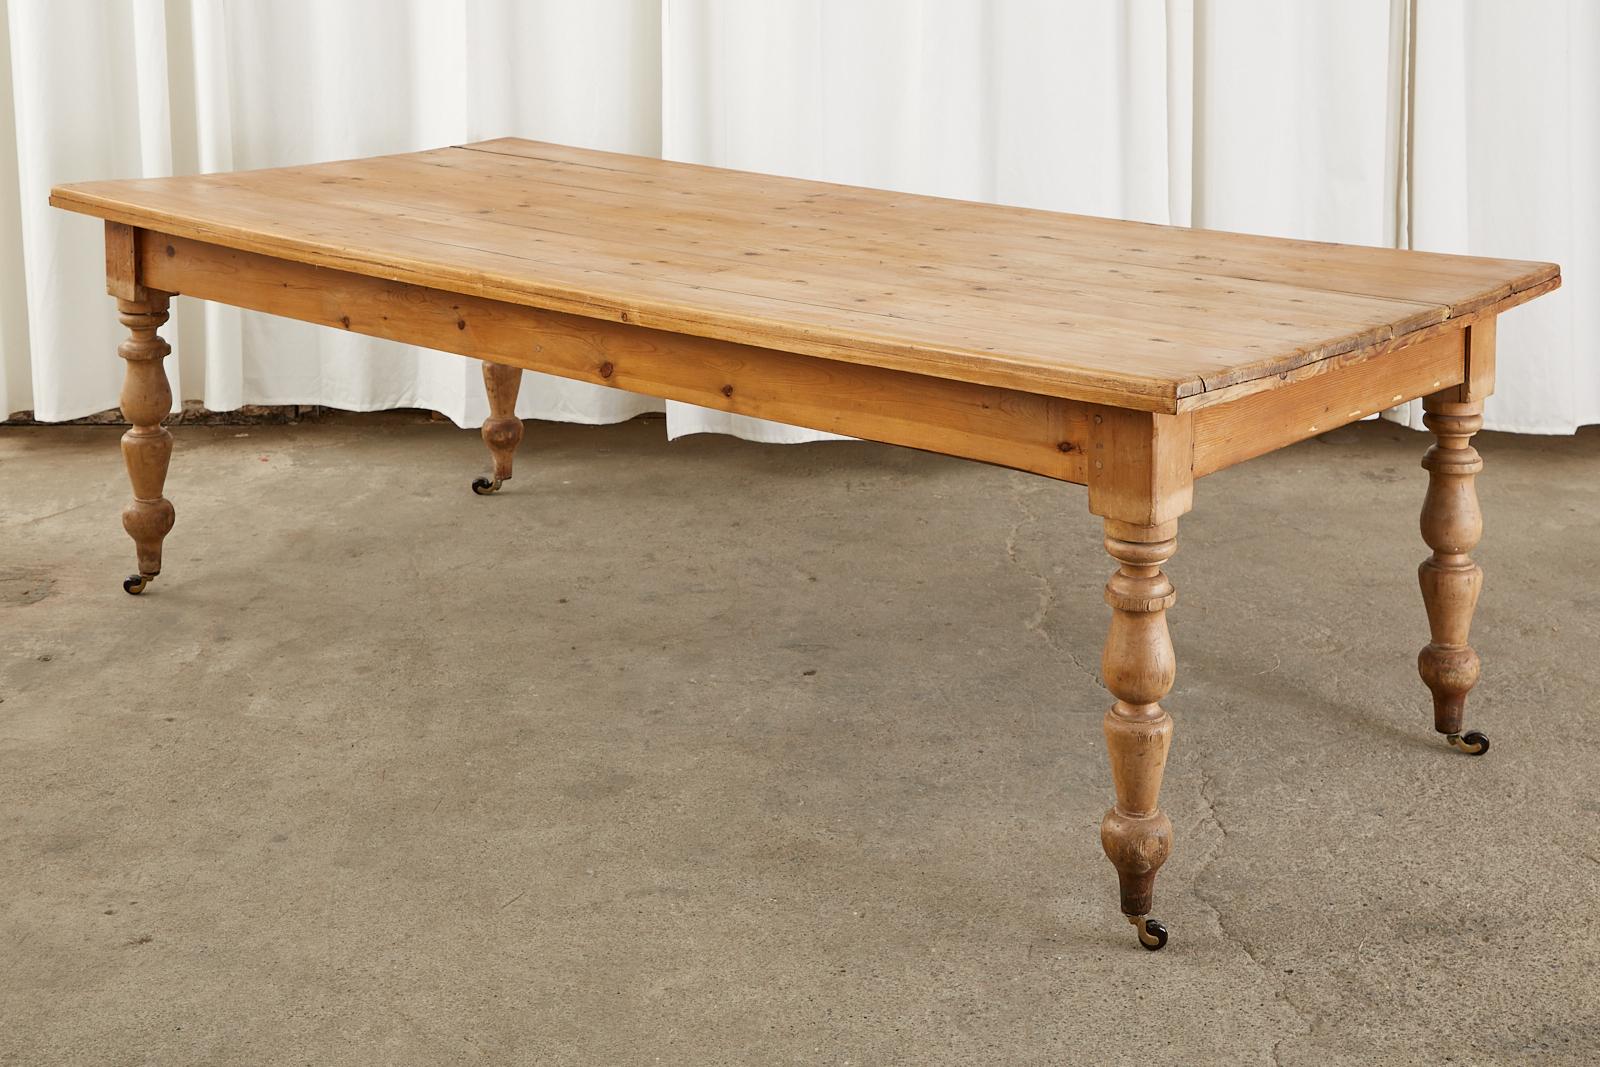 Hand-Crafted 19th Century Country English Pine Farmhouse Dining Table